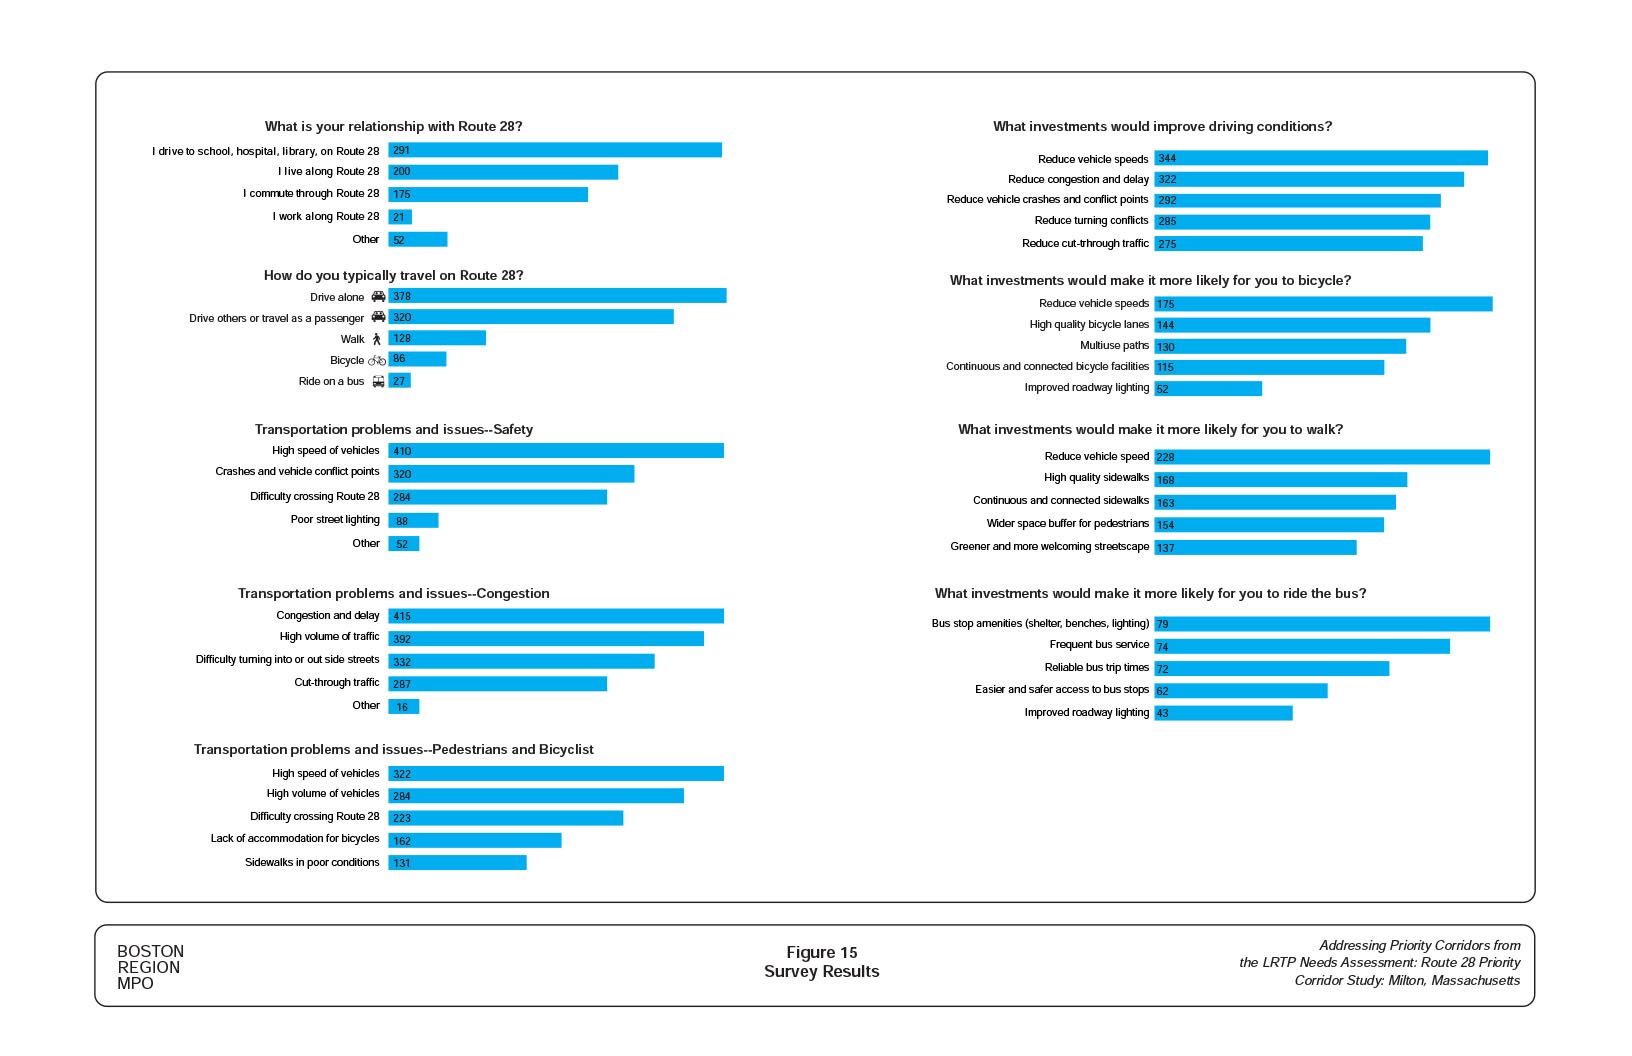 Figure 15
Survey Results
Figure 15 shows the questions contained in the survey, along with the answers received.

